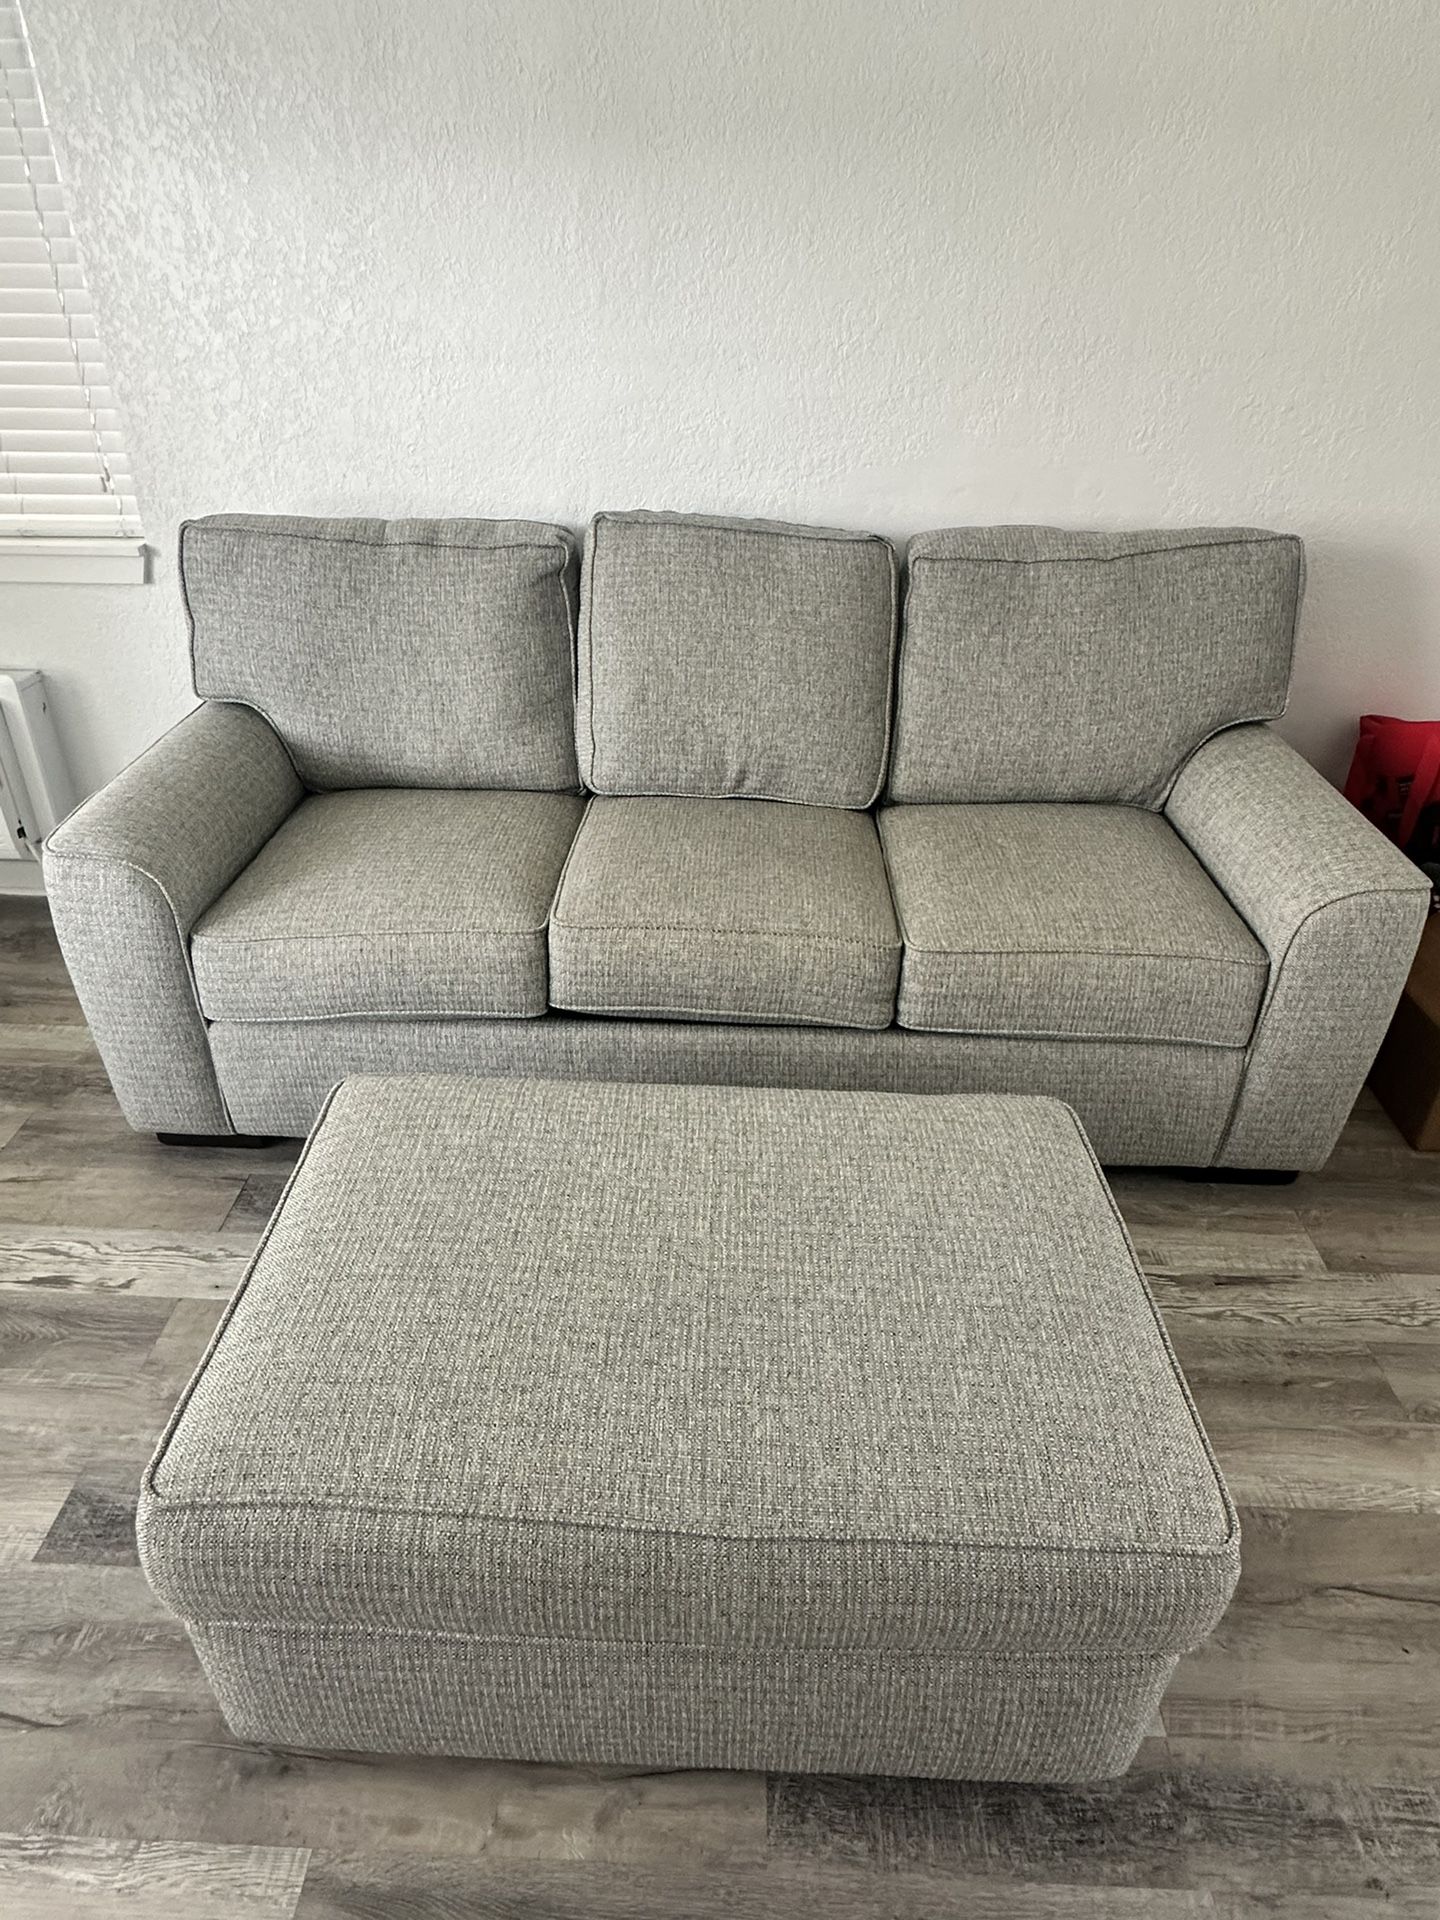 New Couch & Ottoman